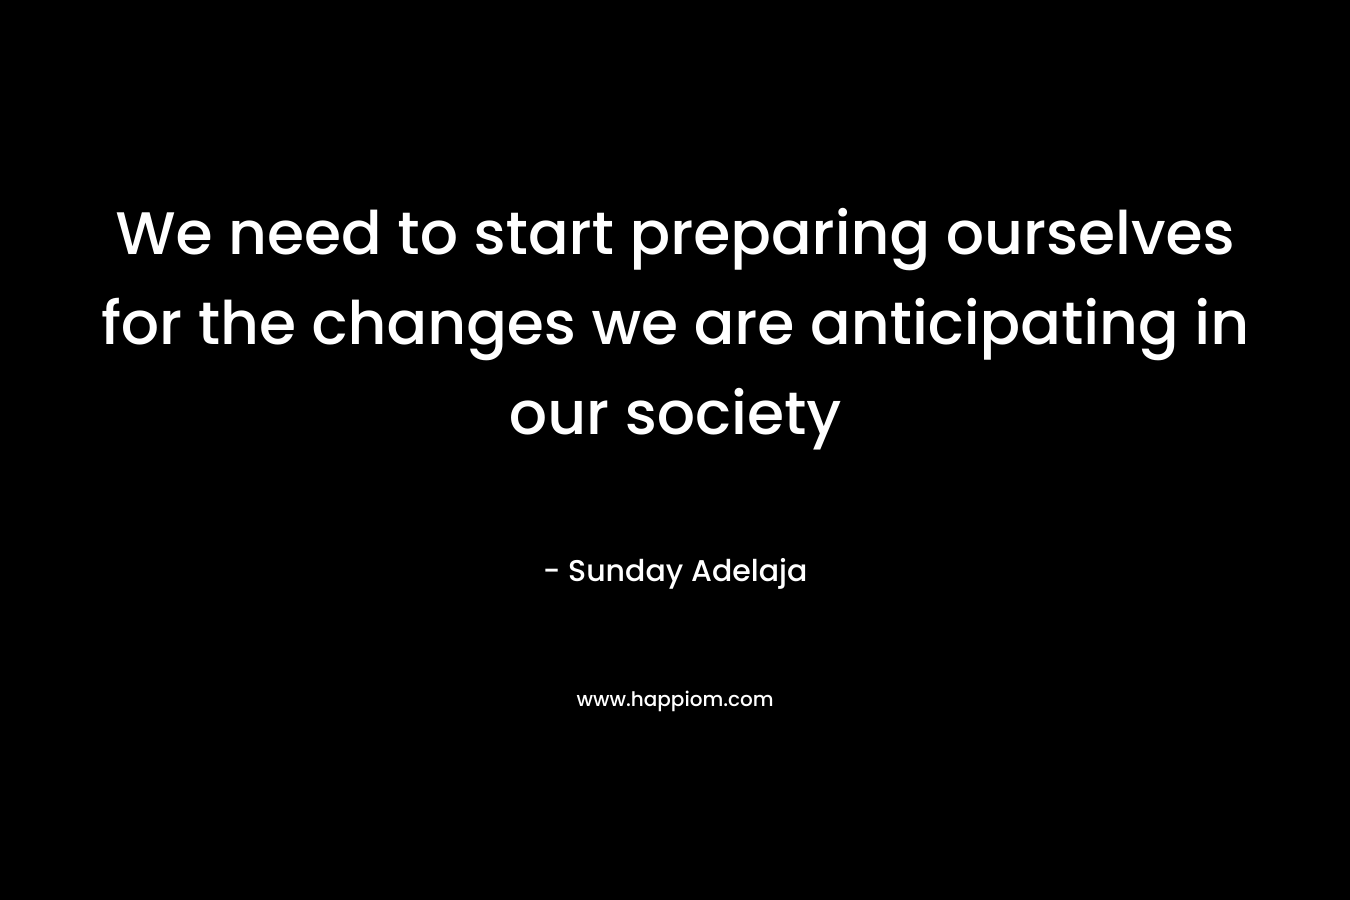 We need to start preparing ourselves for the changes we are anticipating in our society – Sunday Adelaja